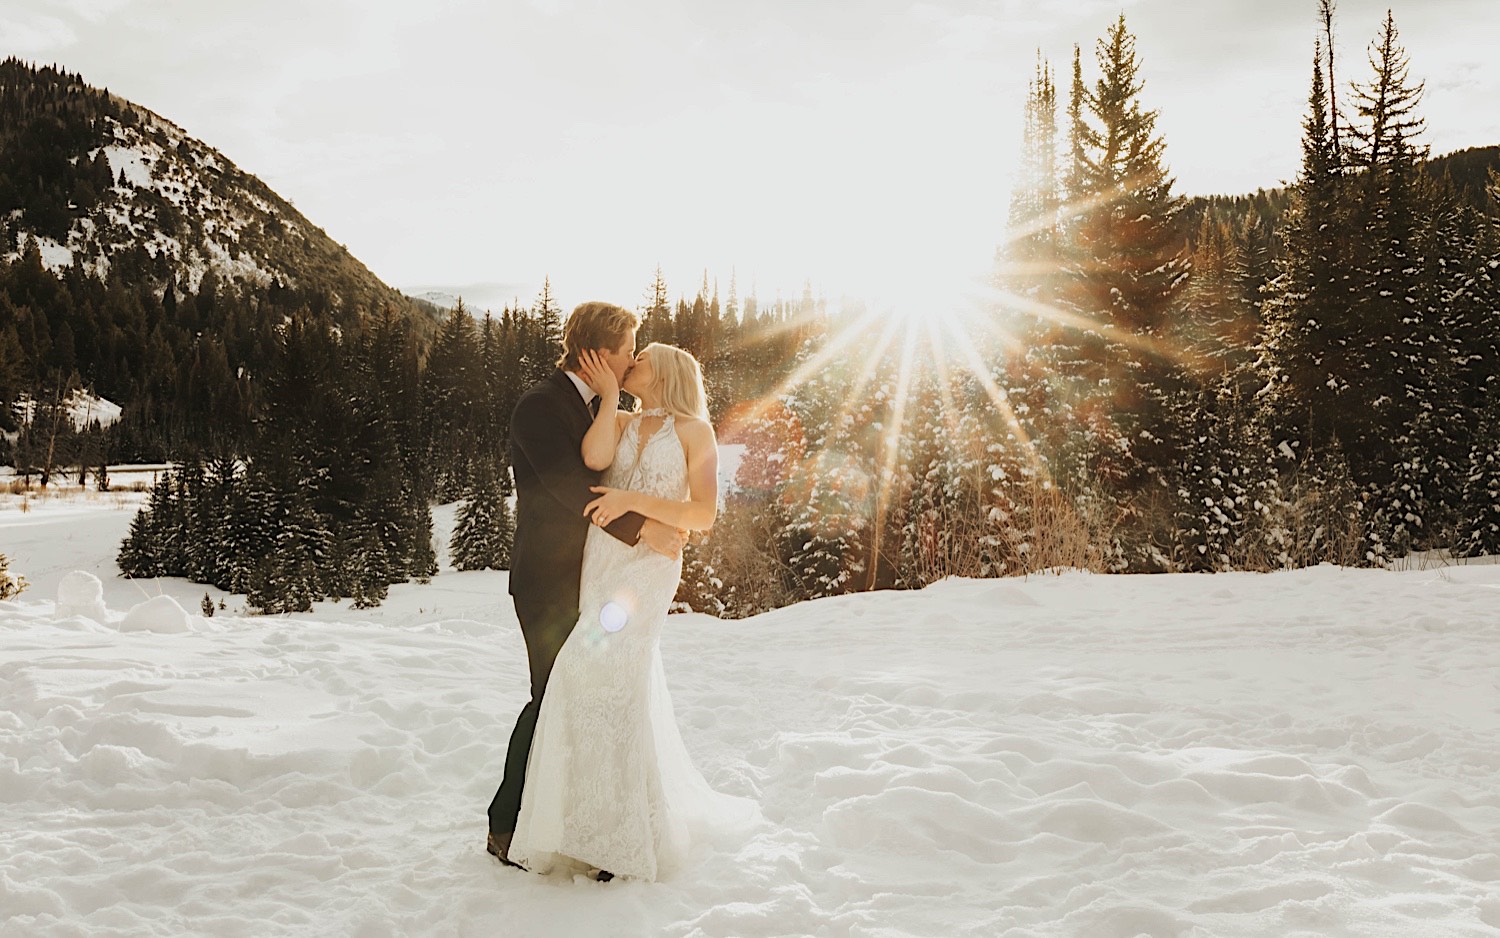 As the sun sets behind them on a snow covered forest near Salt Lake City, a bride and groom kiss one another standing in the snow after their elopement